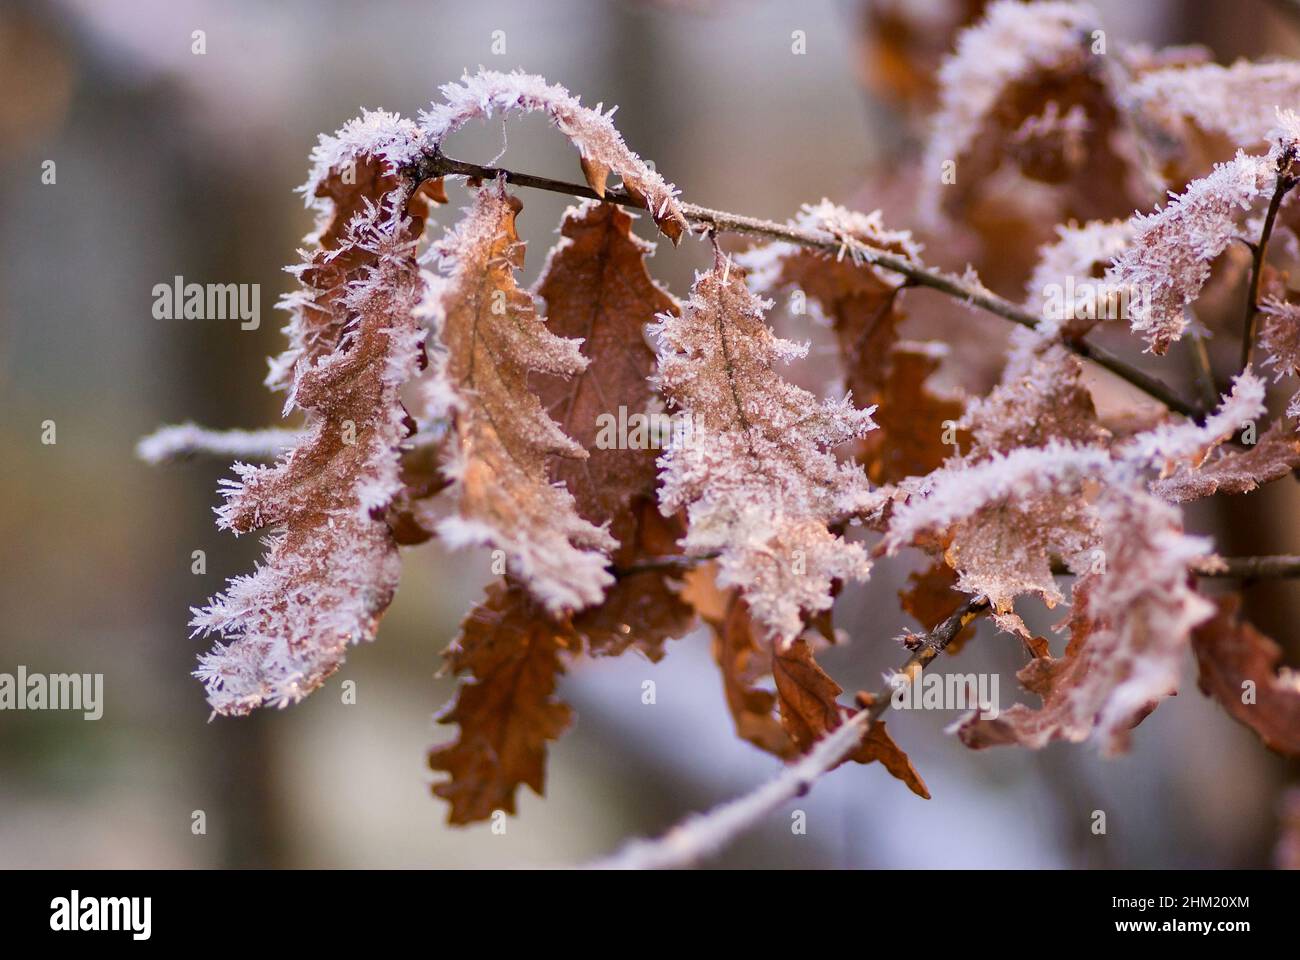 Oak tree branch with brown and frosty leaves in winter. Stock Photo